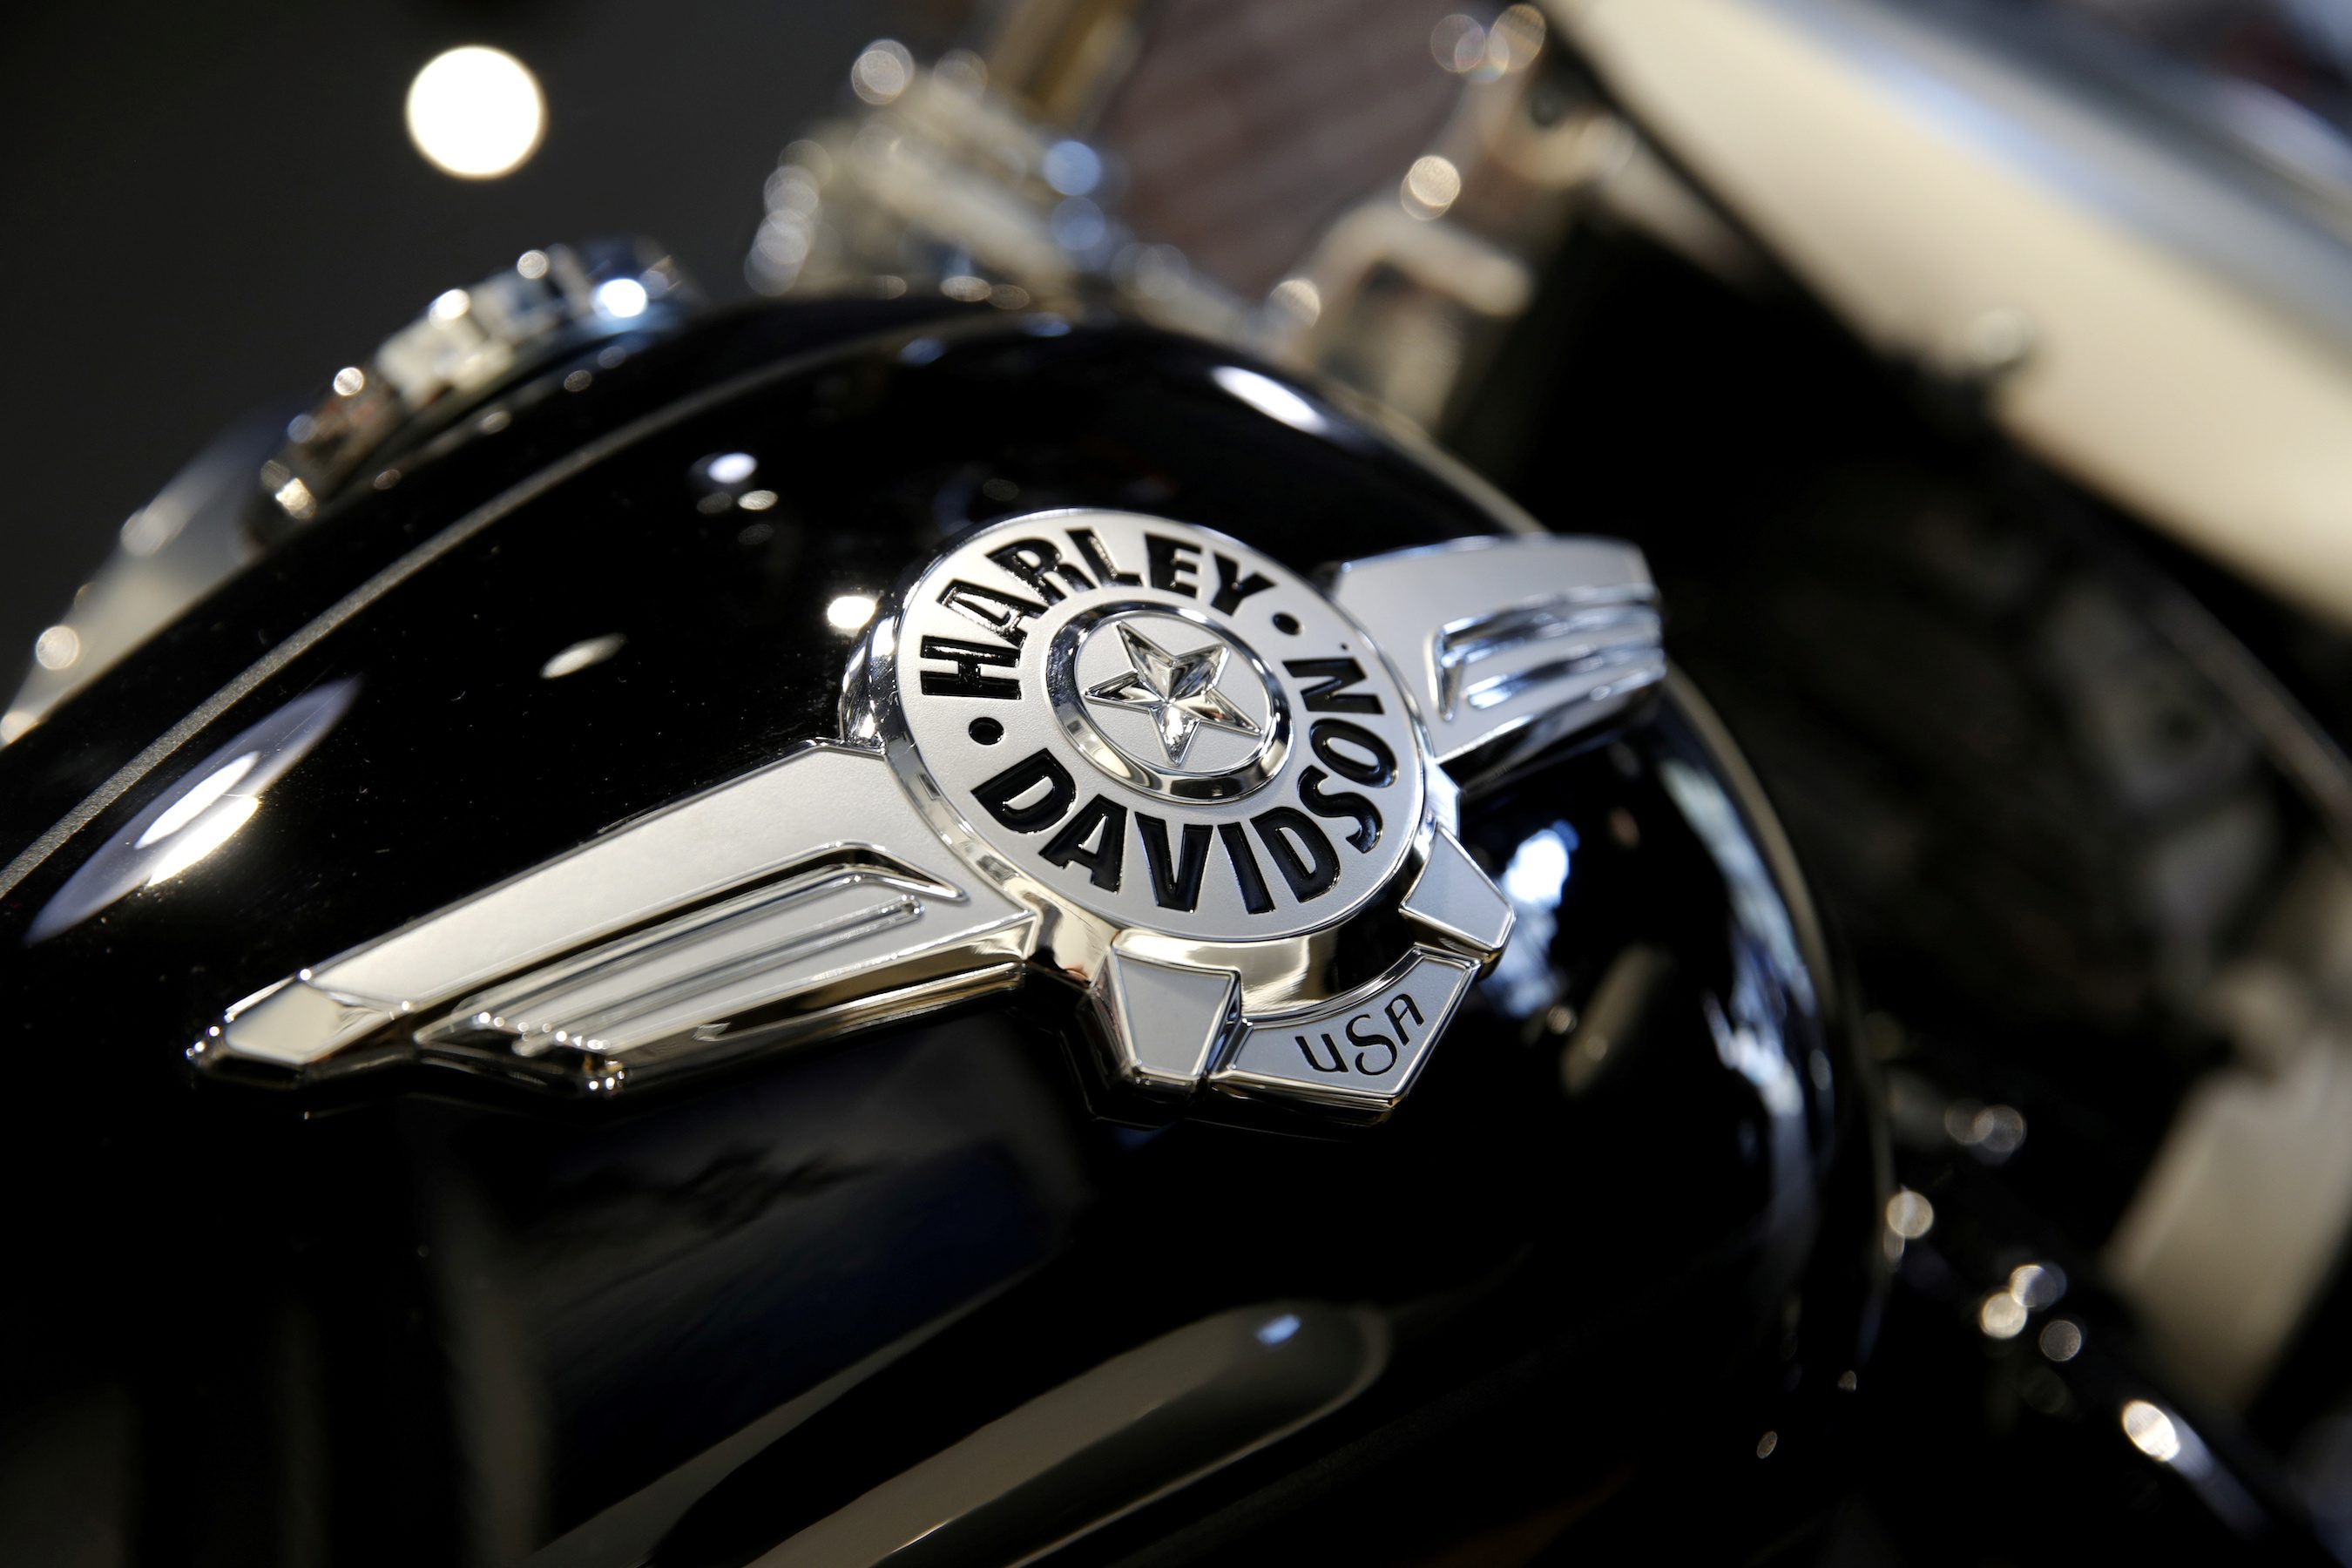 Harley unveils turnaround plan as shares nosedive on disappointing results